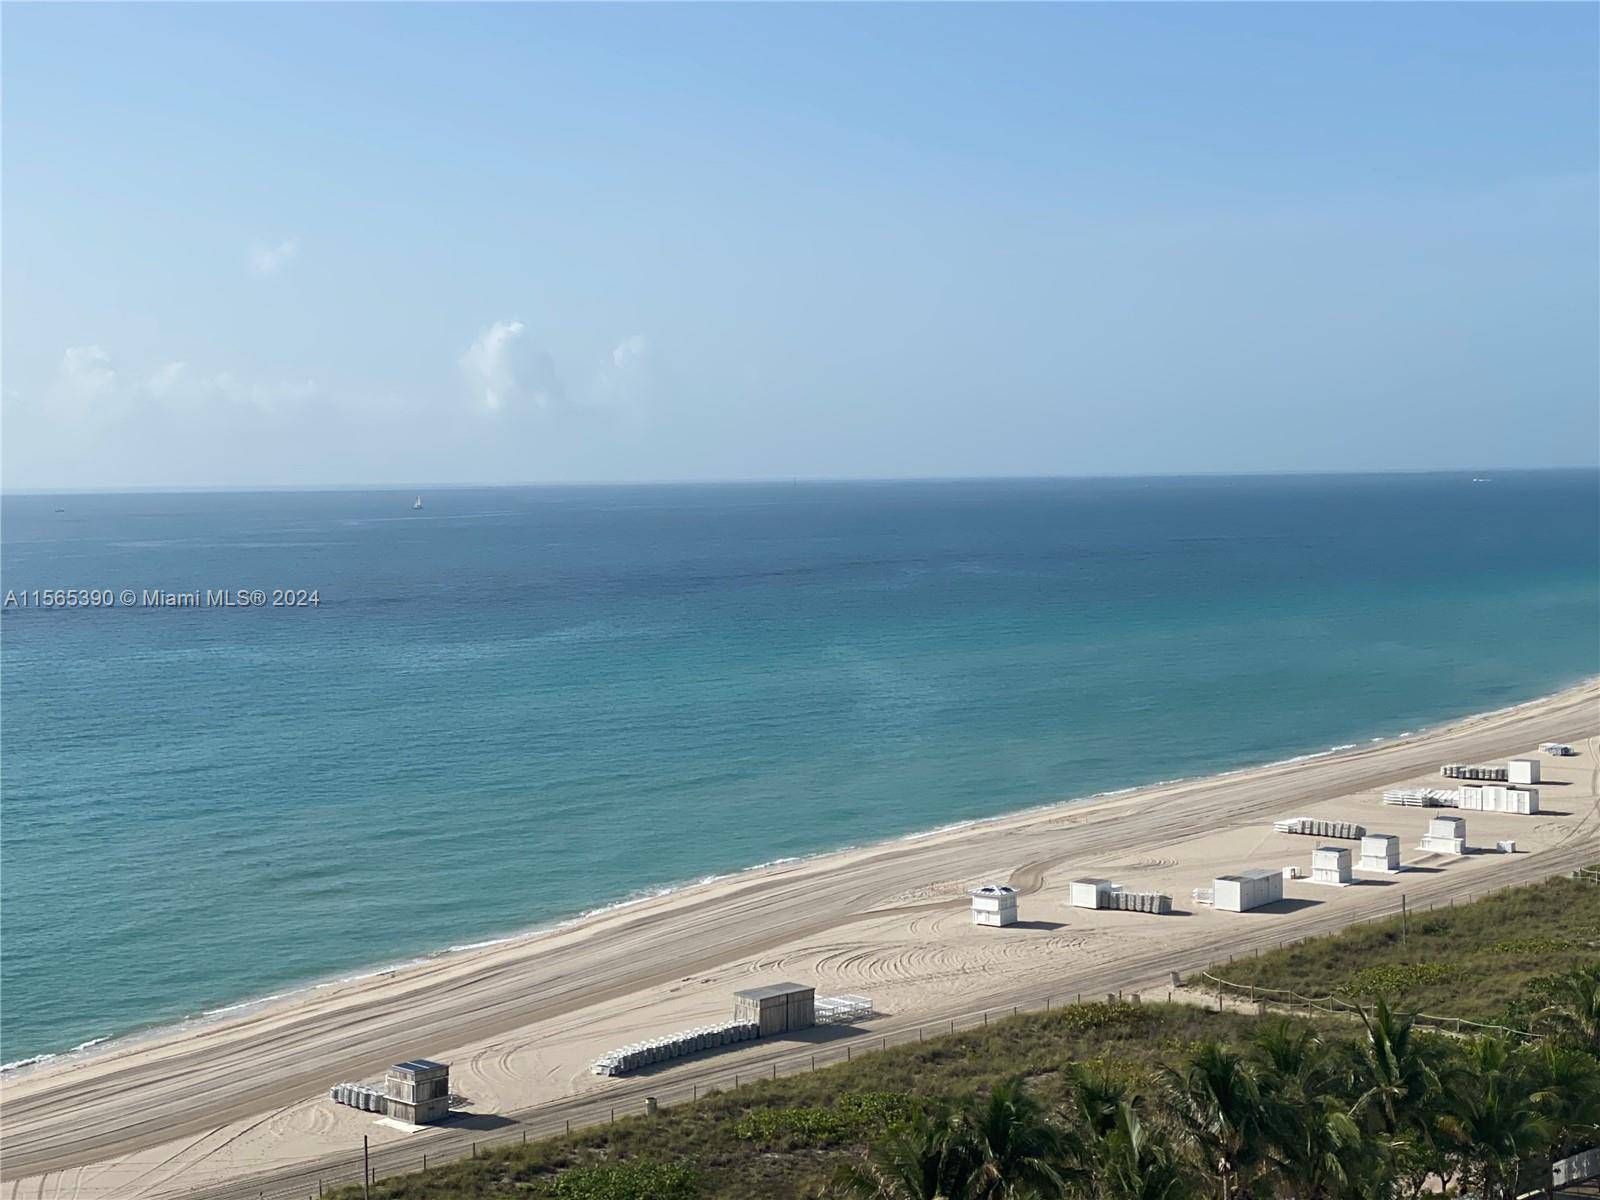 Experience unparalleled views at 1 Hotel Homes Residences South Beach.